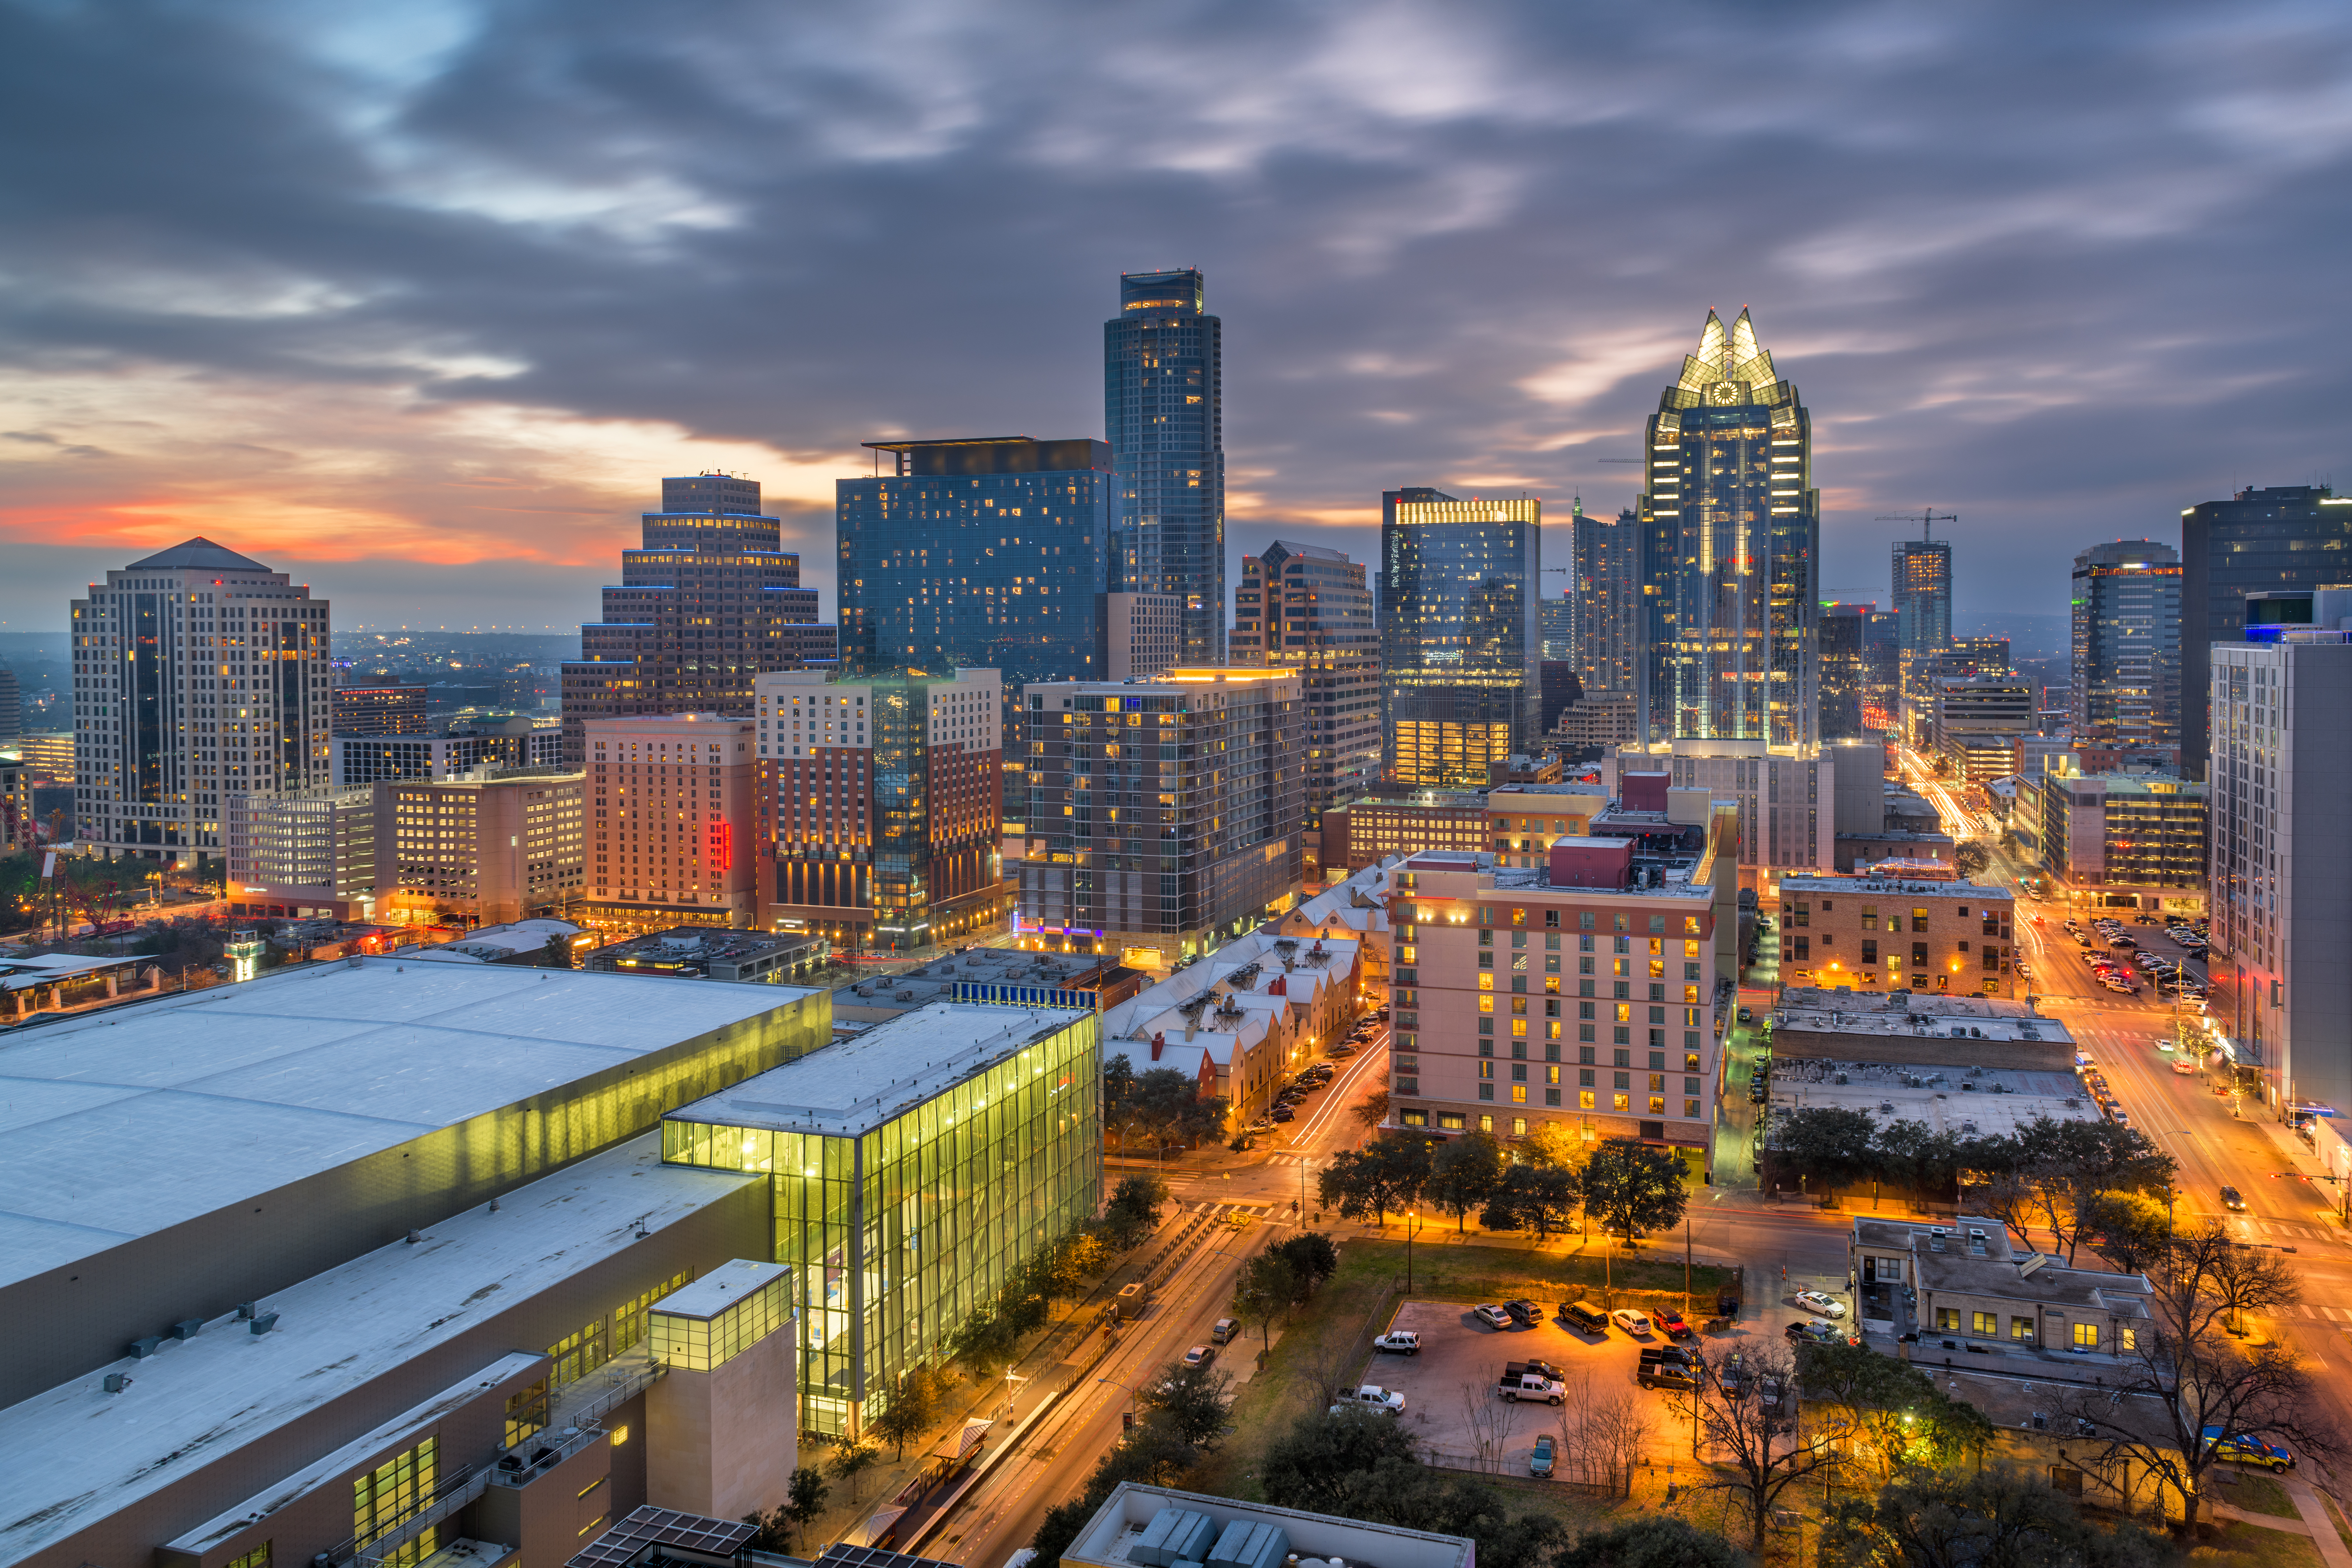 Austin, Texas is one of the most beautiful, entertaining, and proudly quirky places in the U.S.